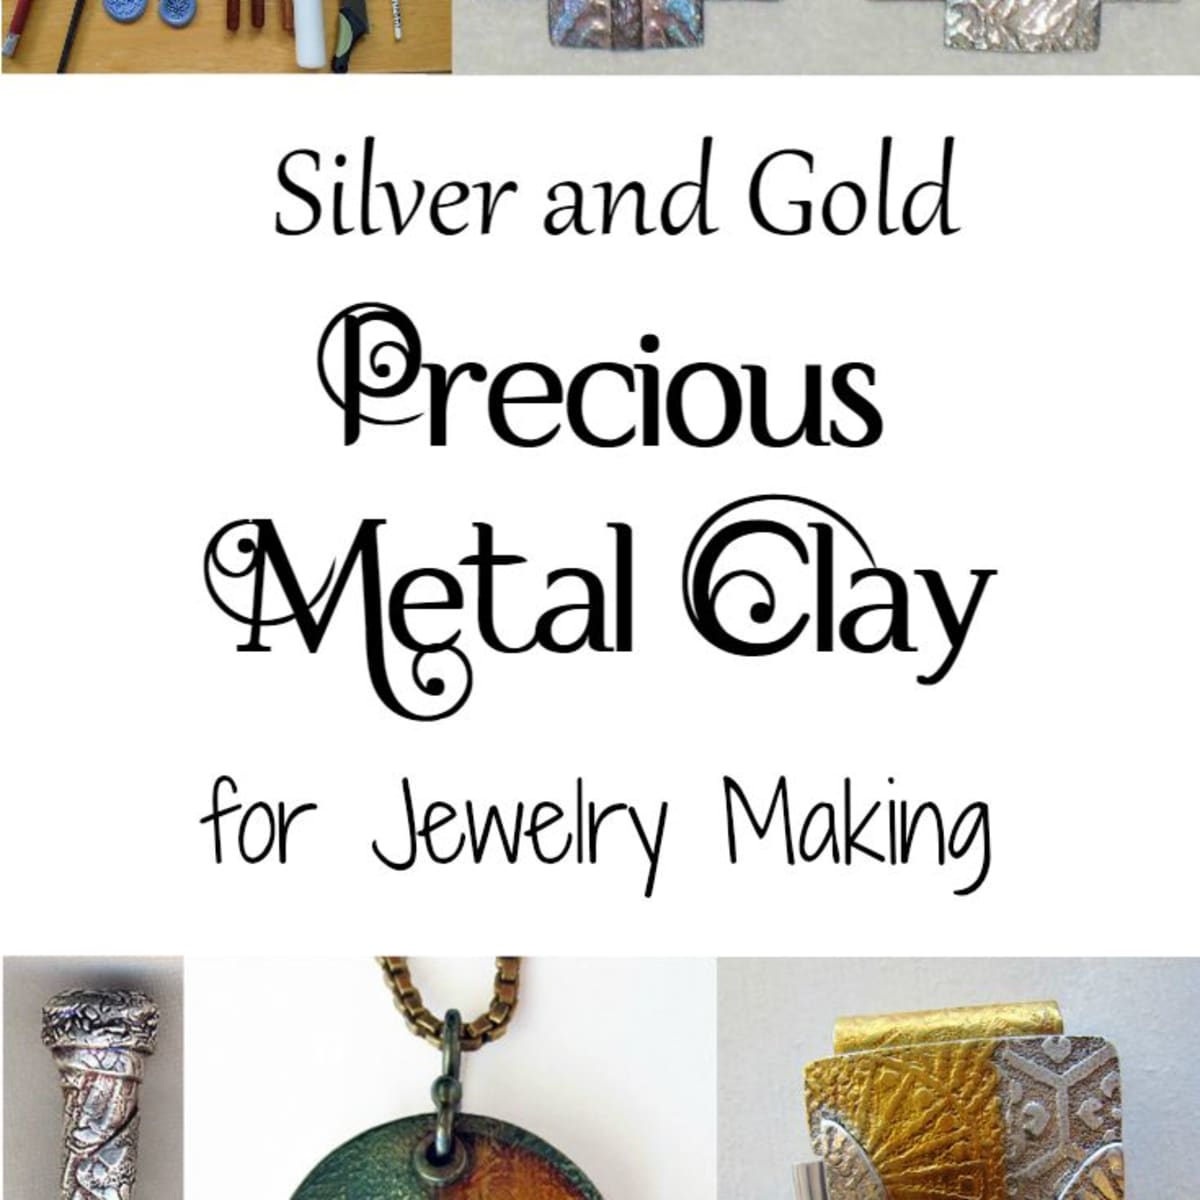 Jewelry Making Article - Precious Metal Clay Tips and Product Information -  Fire Mountain Gems and Beads